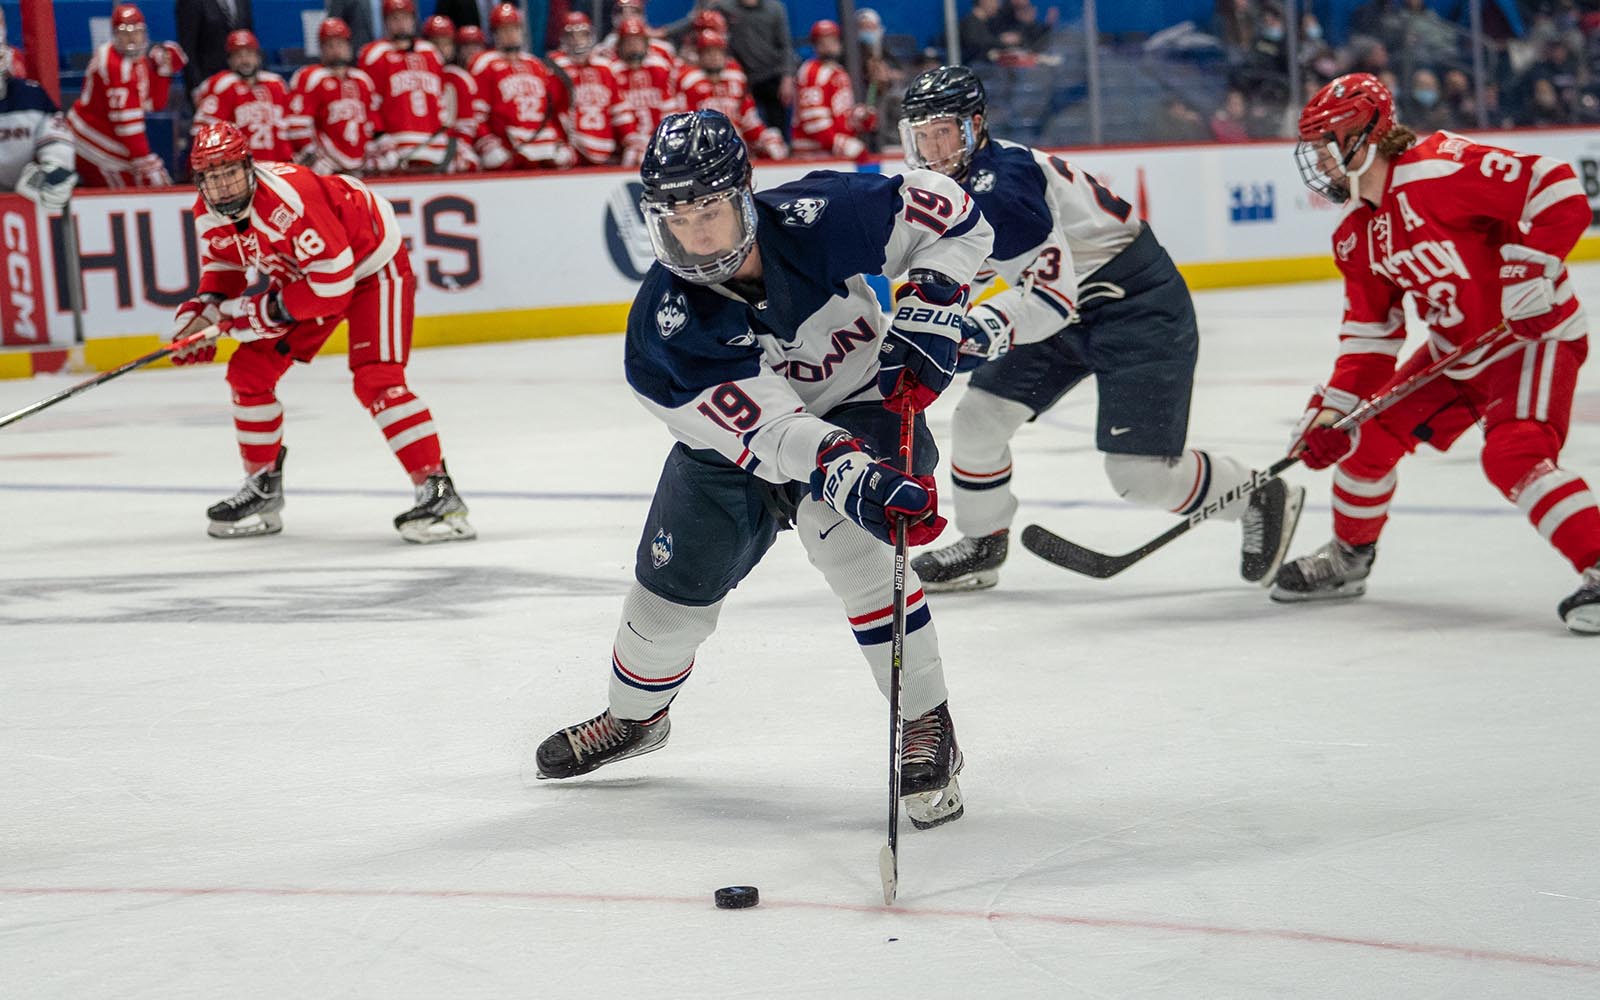 Kevin O'Neil, #19 on the Men's Hockey team, during a recent game with BU. (Photo Courtesy UConn Atlhetics)